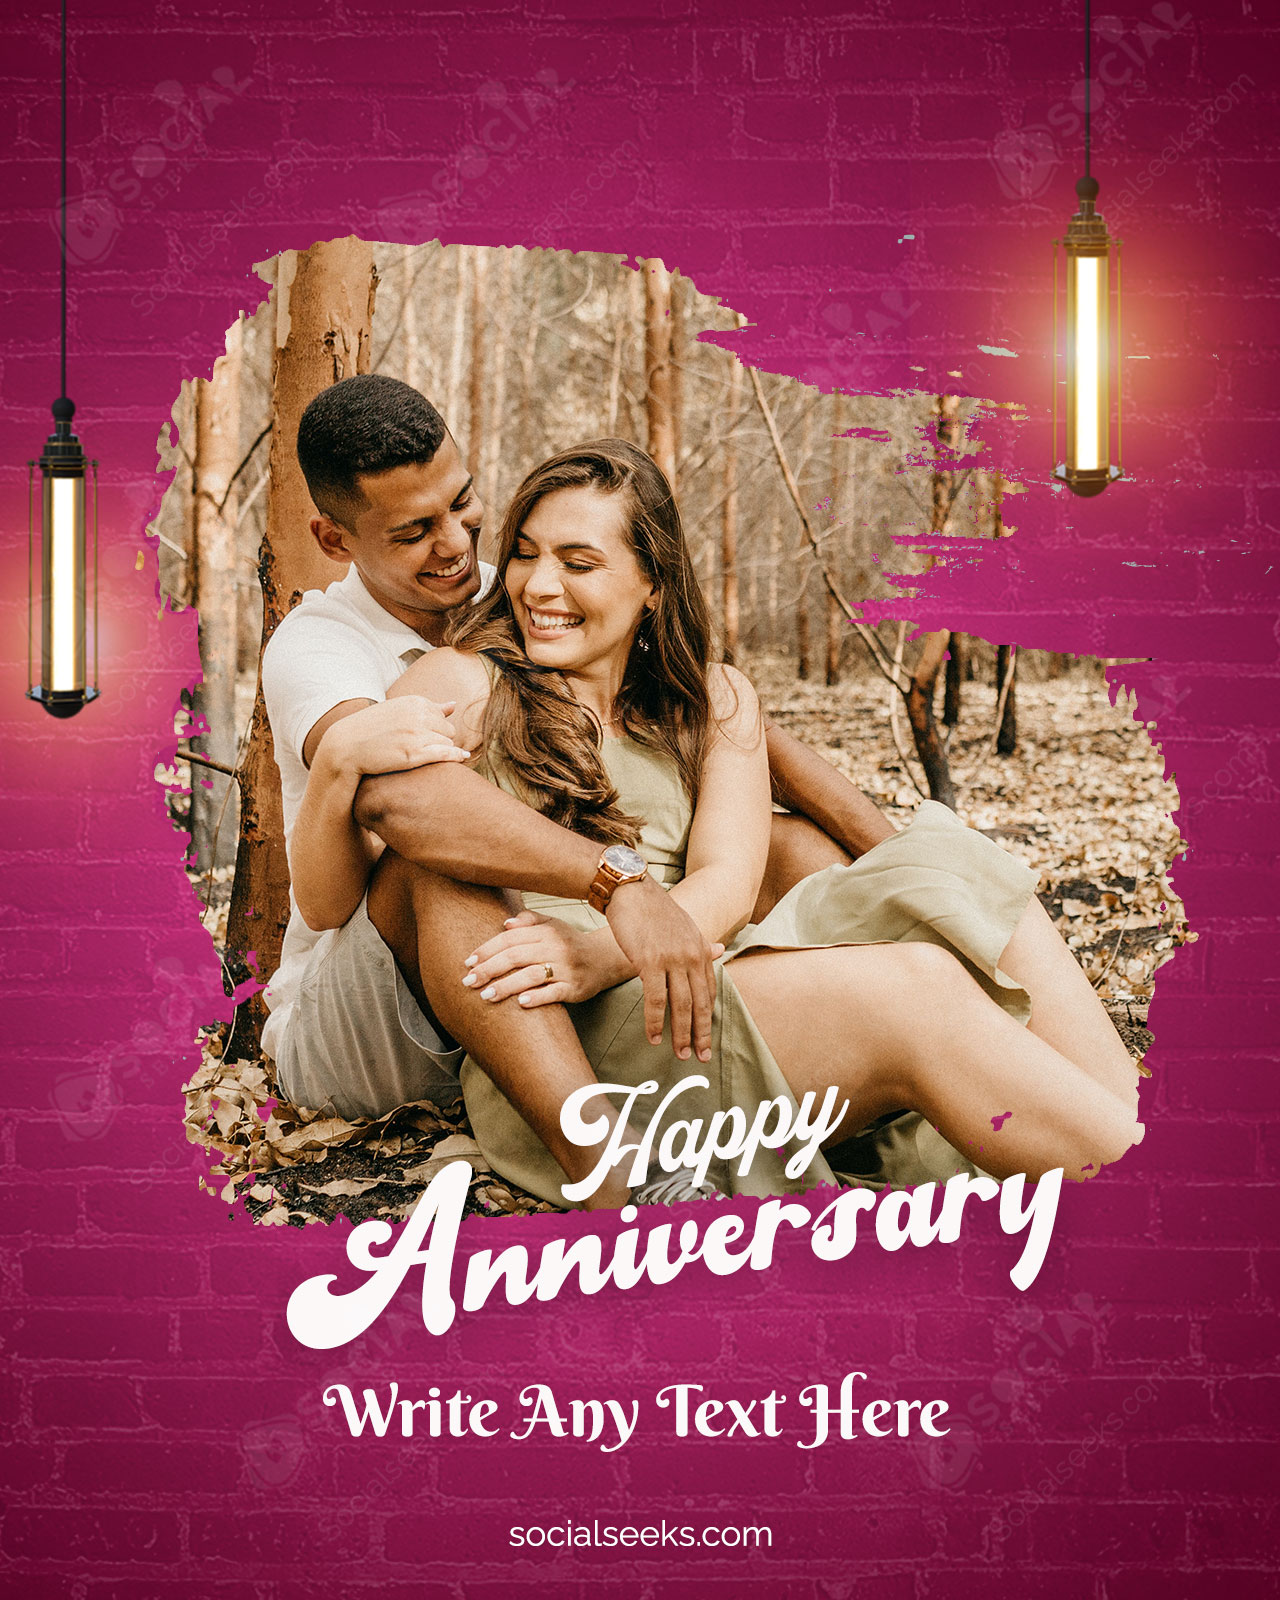 Personalised Wedding Anniversary Cards For Your Partner